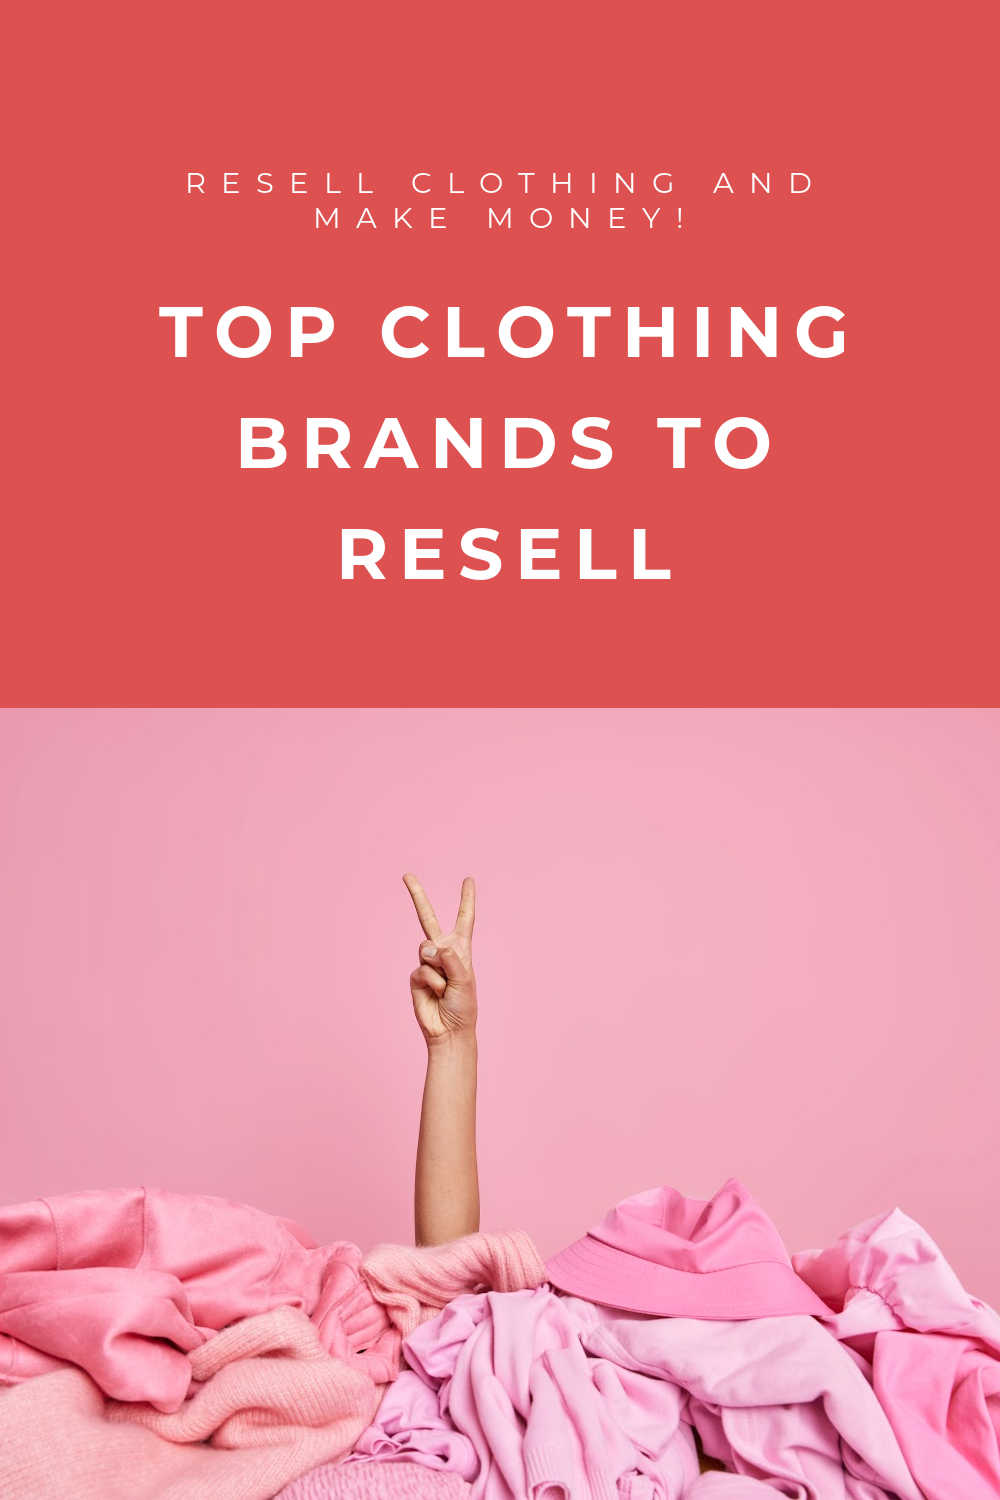 CLOTHING TO RESELL